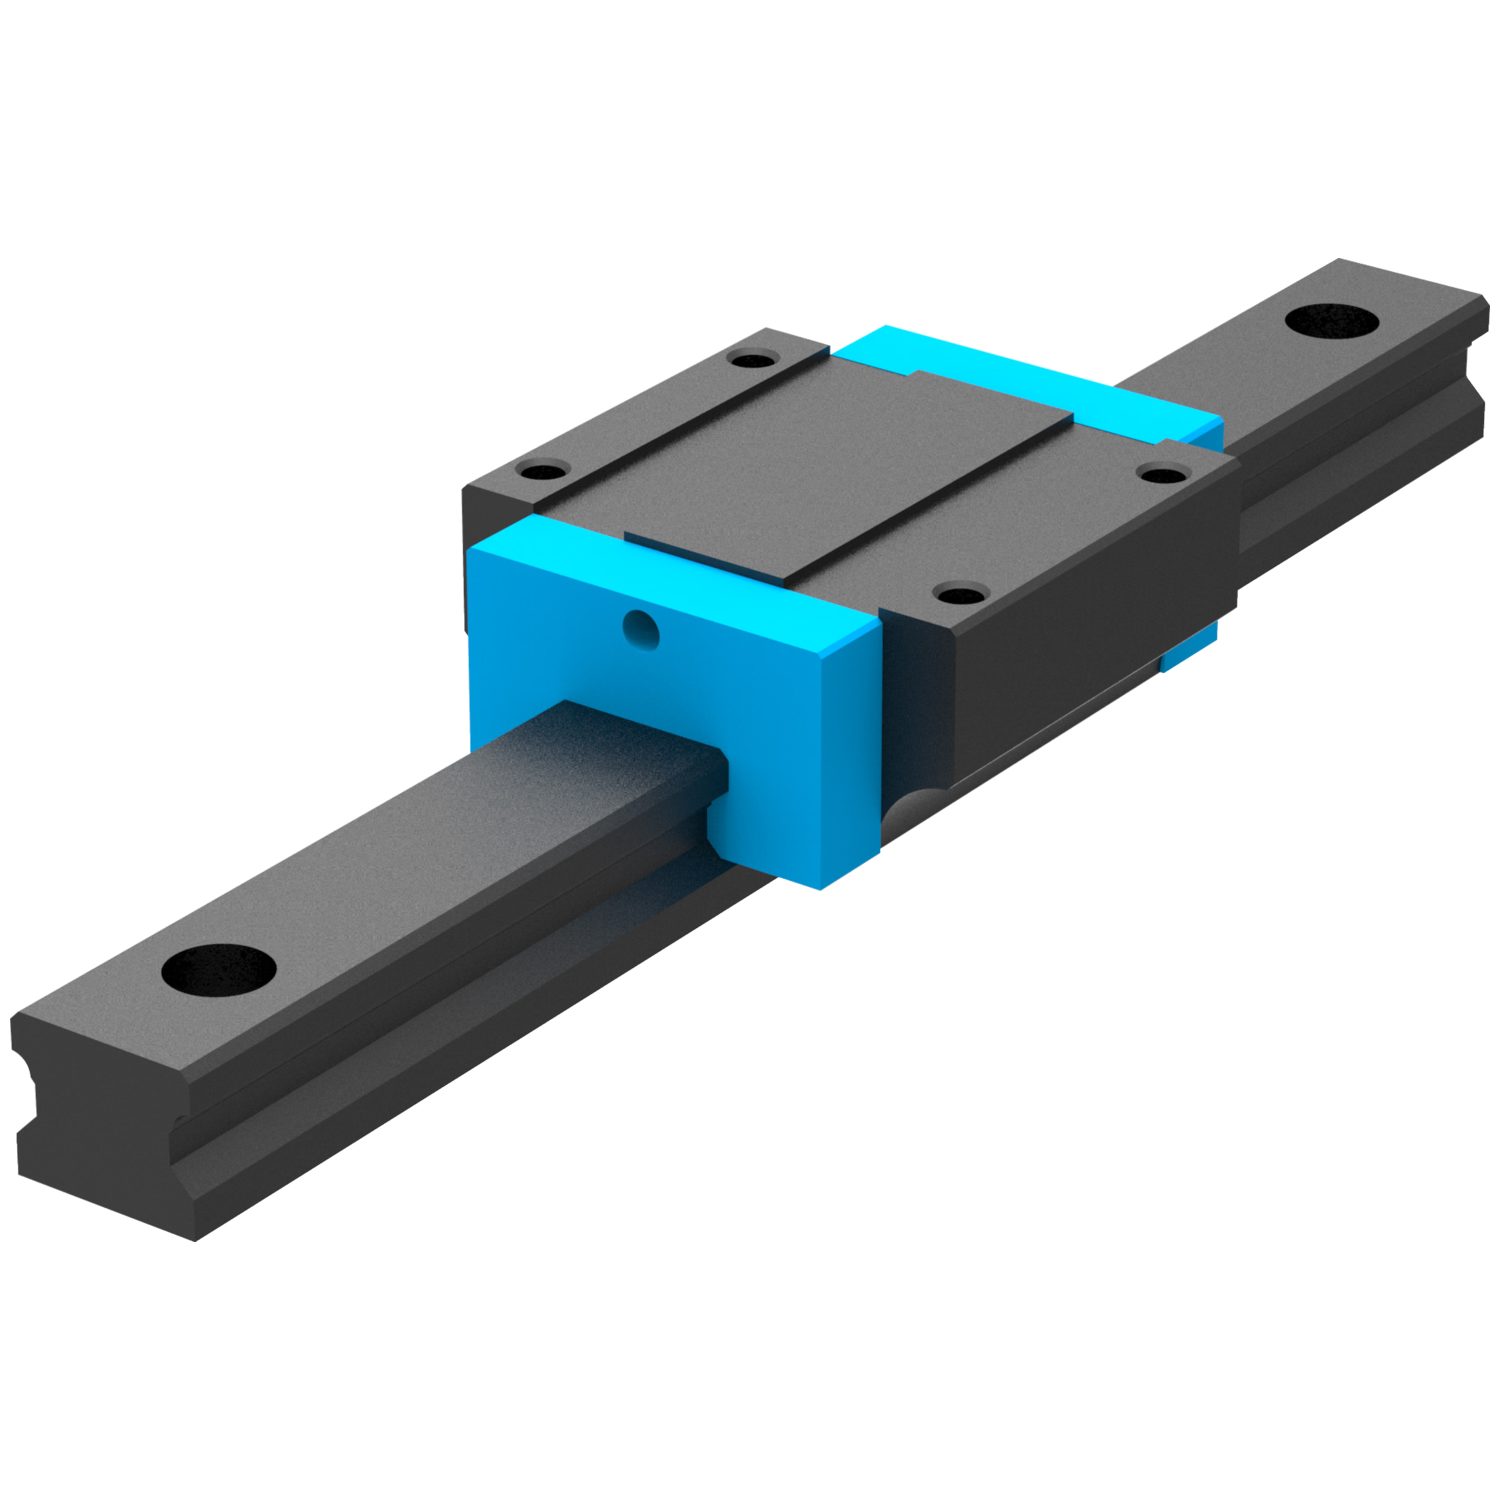 Linear Guideways Blackened front fixing linear guideway, comes in 15mm, 20mm & 25mm lengths. Rear-fixing versions (L1016.BR) and matching blackened carriages (L1016.F-BC and L1016.U-BC) also available.